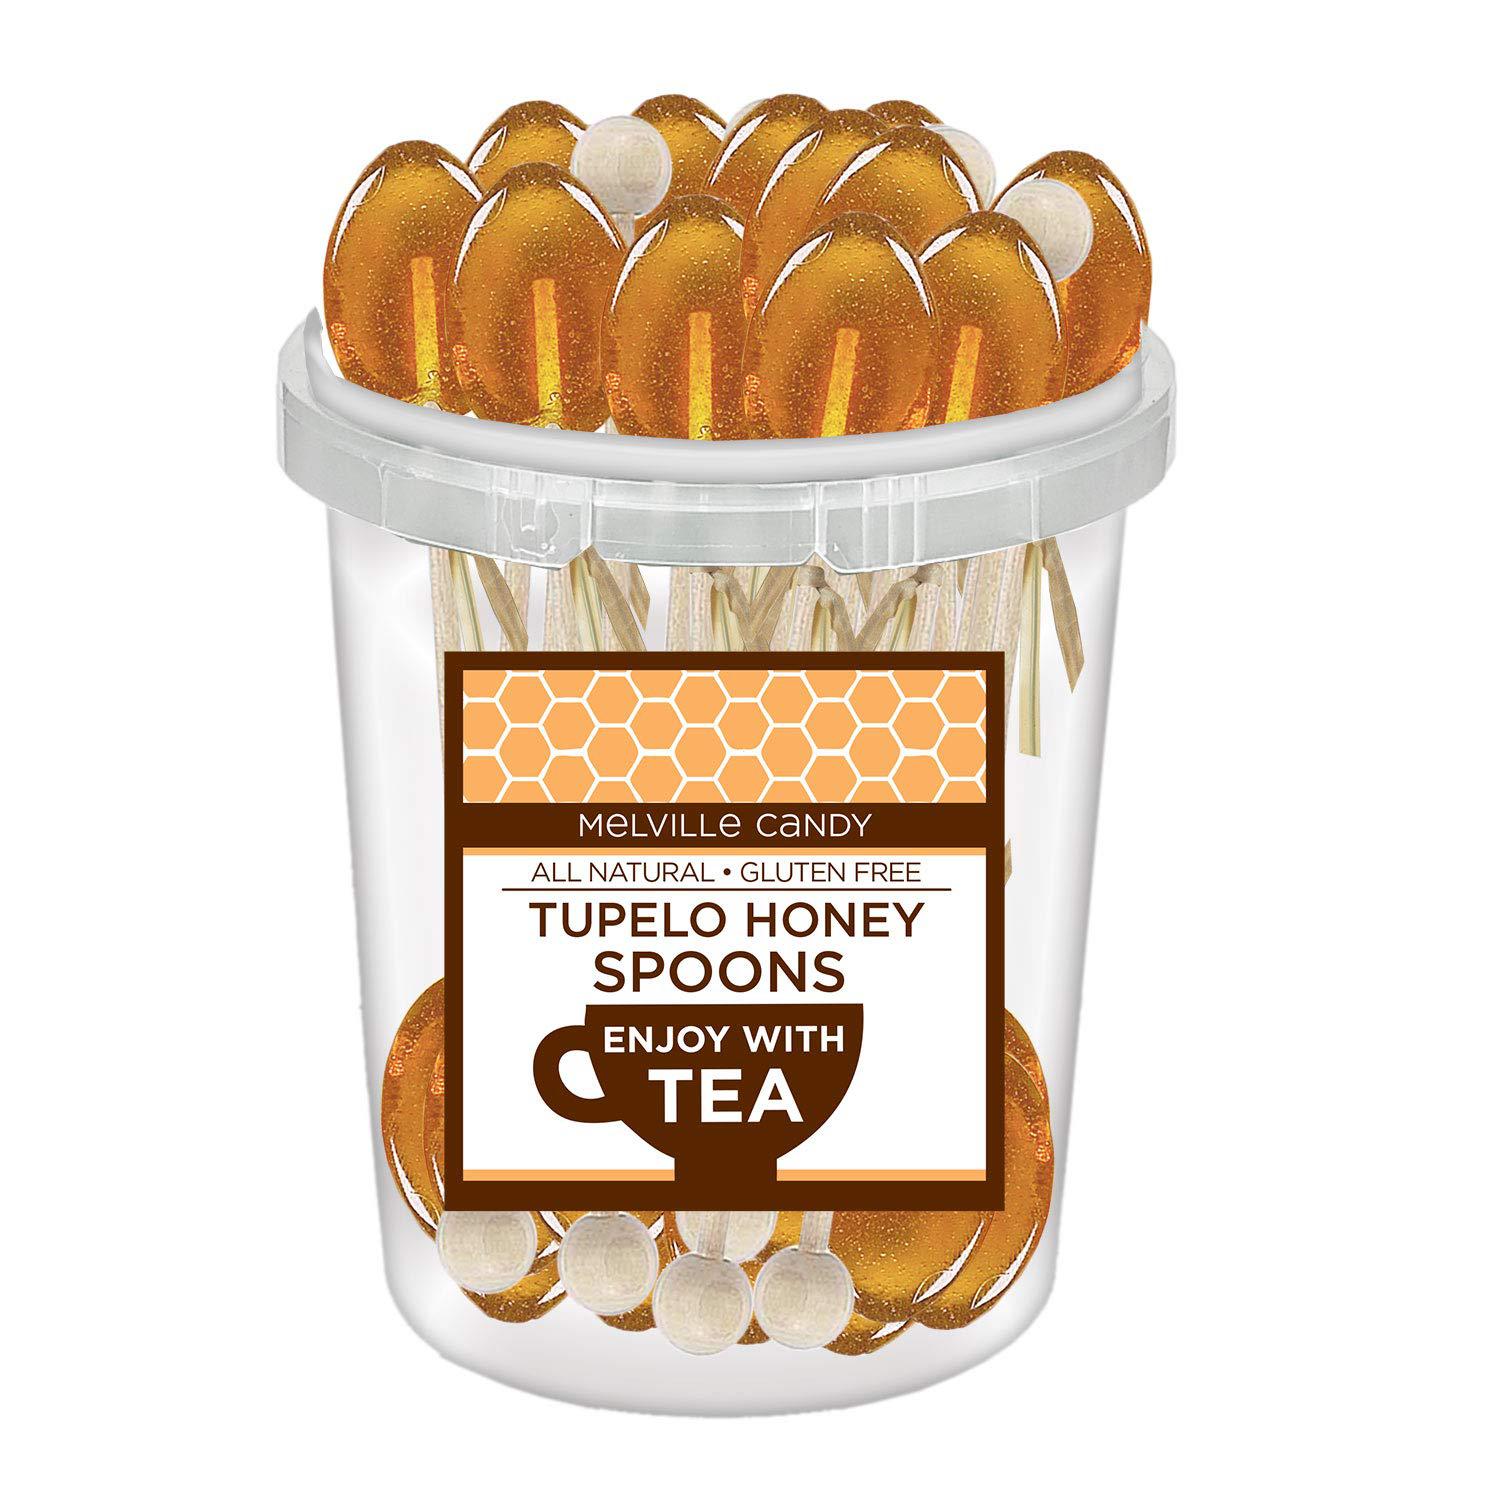 Melville Candy tupelo honey spoon (30 count)